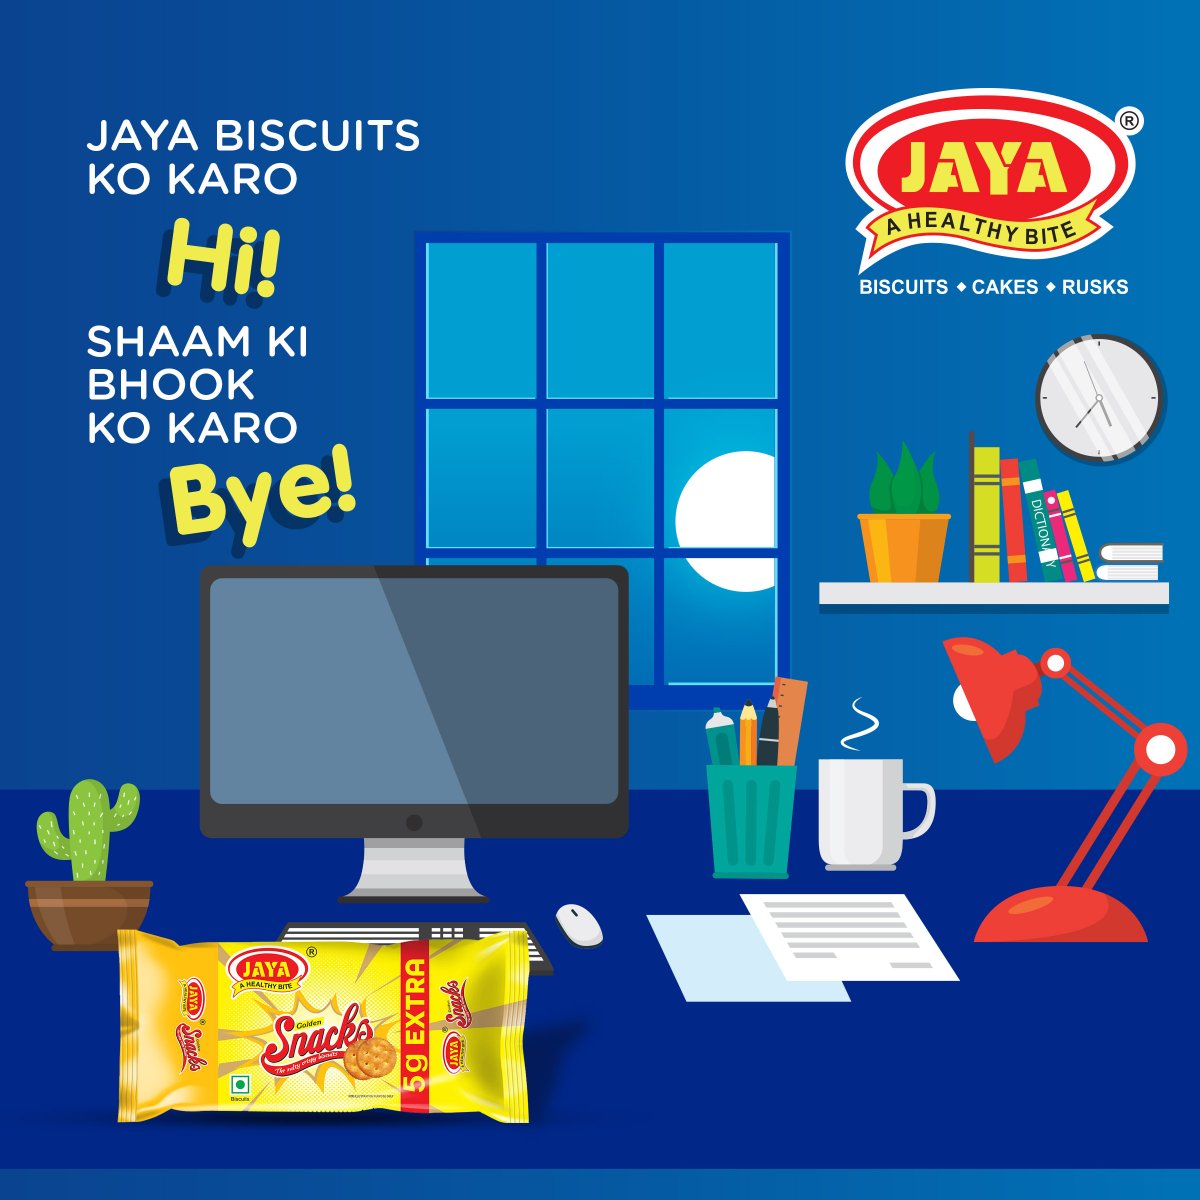 Say 'Adios' to your evening cravings with Jaya Biscuits. 

.

.

.

.

.

#SabkiPasandJaya #newyear #happynewyear #happy2023 #snacks #mariebiscuits #sweets #munching  #biscuitlover #sweetbiscuit #biscuits #healthyandtasty #healthybiscuits #snacktime #loveforbiscuits #cakes